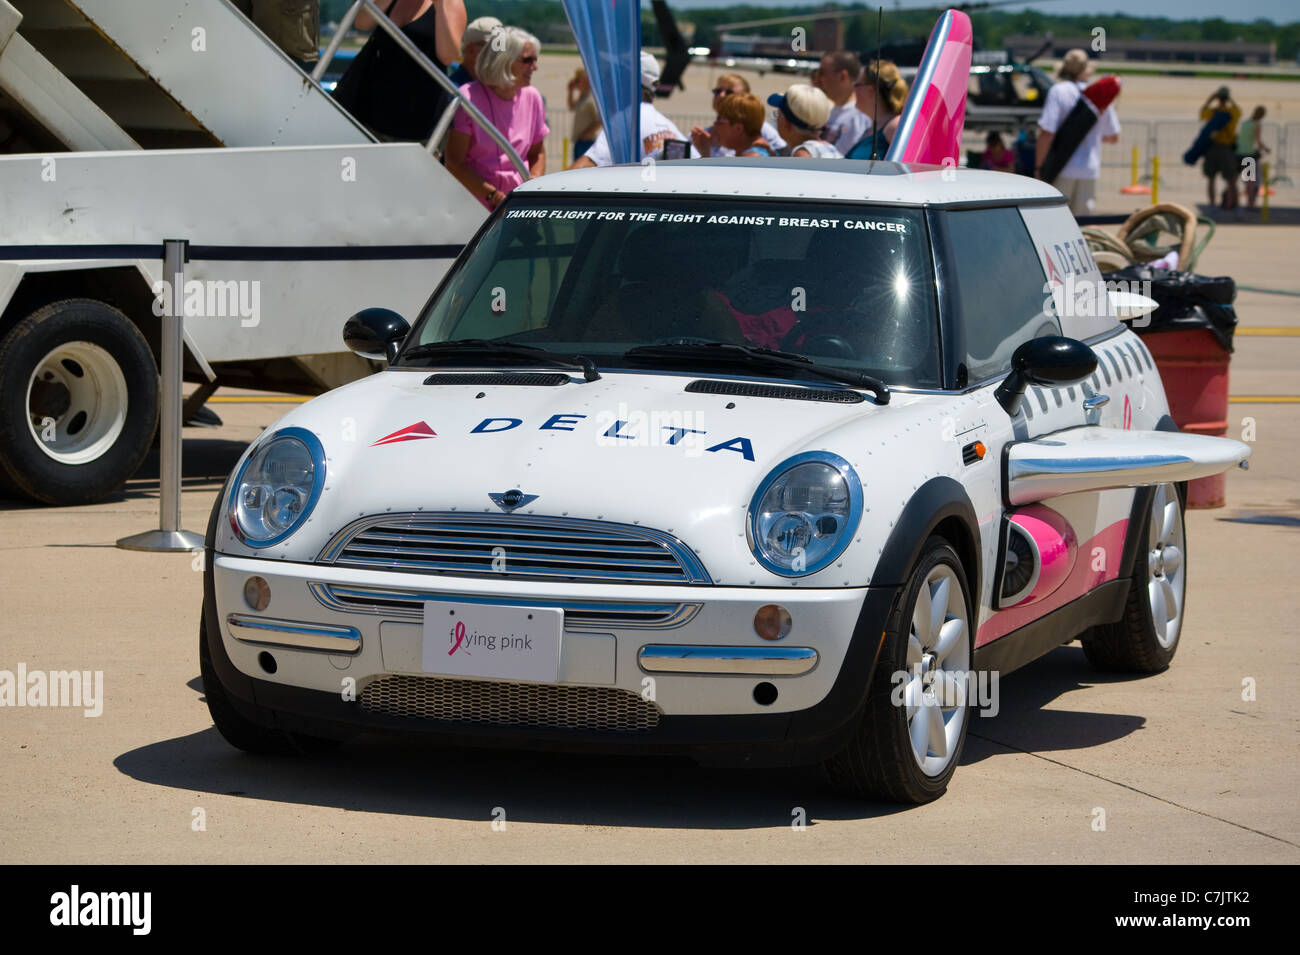 mini car on static display at Air Fest Show Stock Photo